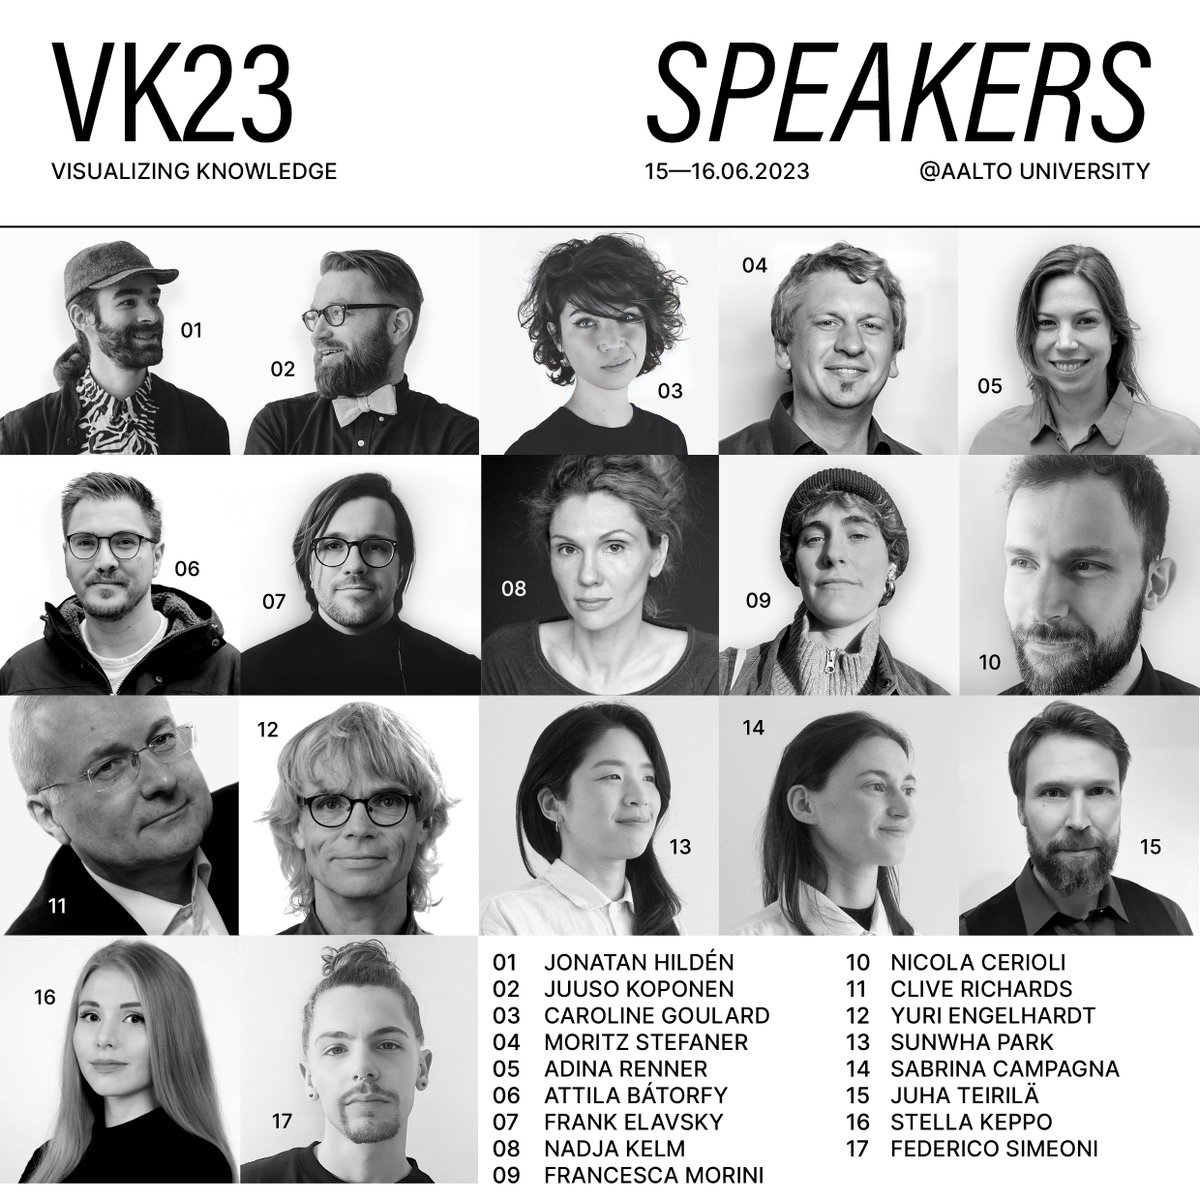 It’s almost time for the #VK23 conference! Check out our exciting line up and join us @AaltoUniversity and via our #livestream 16 June. Get ready for a day of great insights from our brilliant speakers. Don't miss out! https://t.co/GHMAeQZx1N

#dataviz #conference #helsinki https://t.co/YfzMmkhyTZ